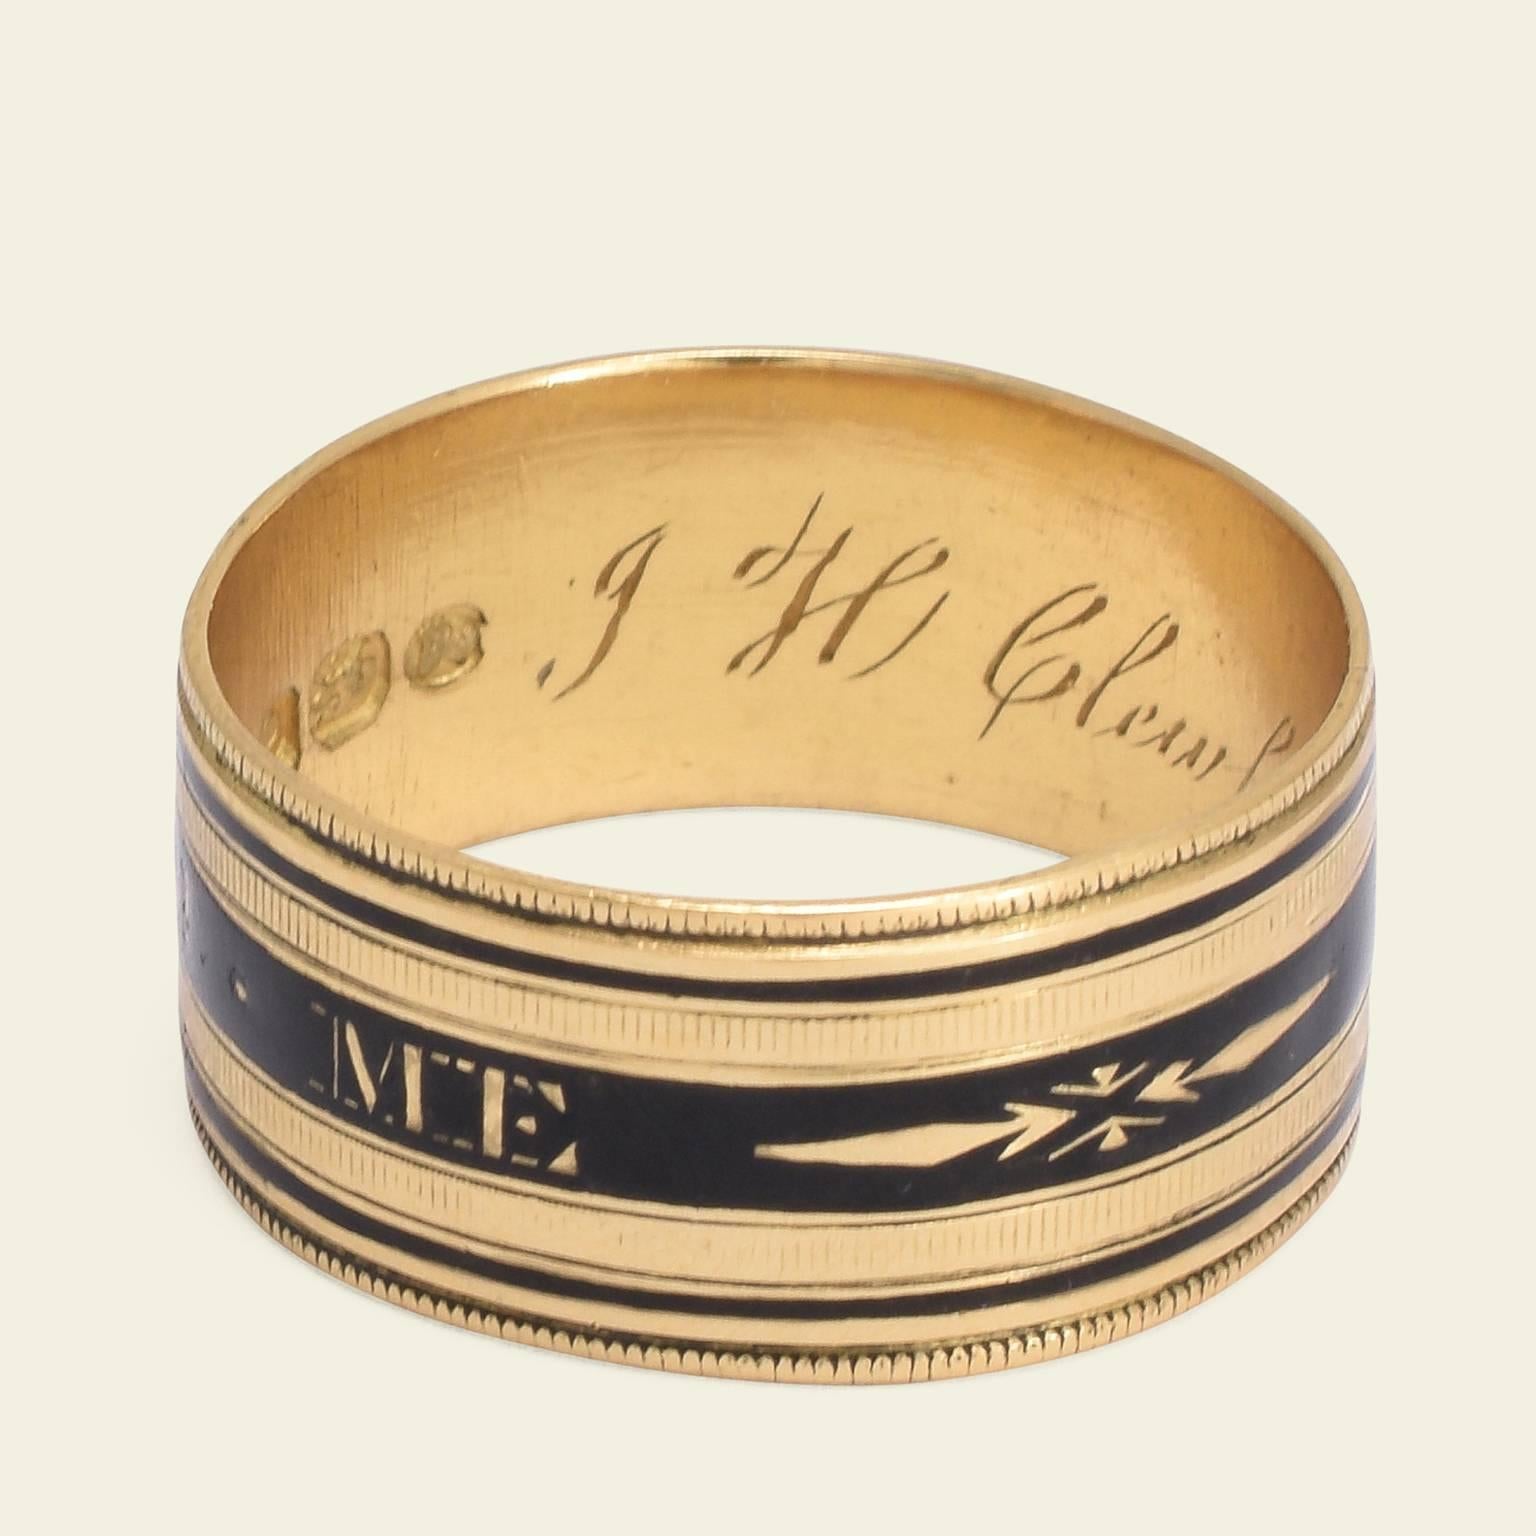 This amazing Georgian mourning band is modeled in 18k yellow gold and black enamel. Memorial rings in this style typically feature the words "In Memory Of" on the outside of the hoop, this ring, however, has the very unusual phrase